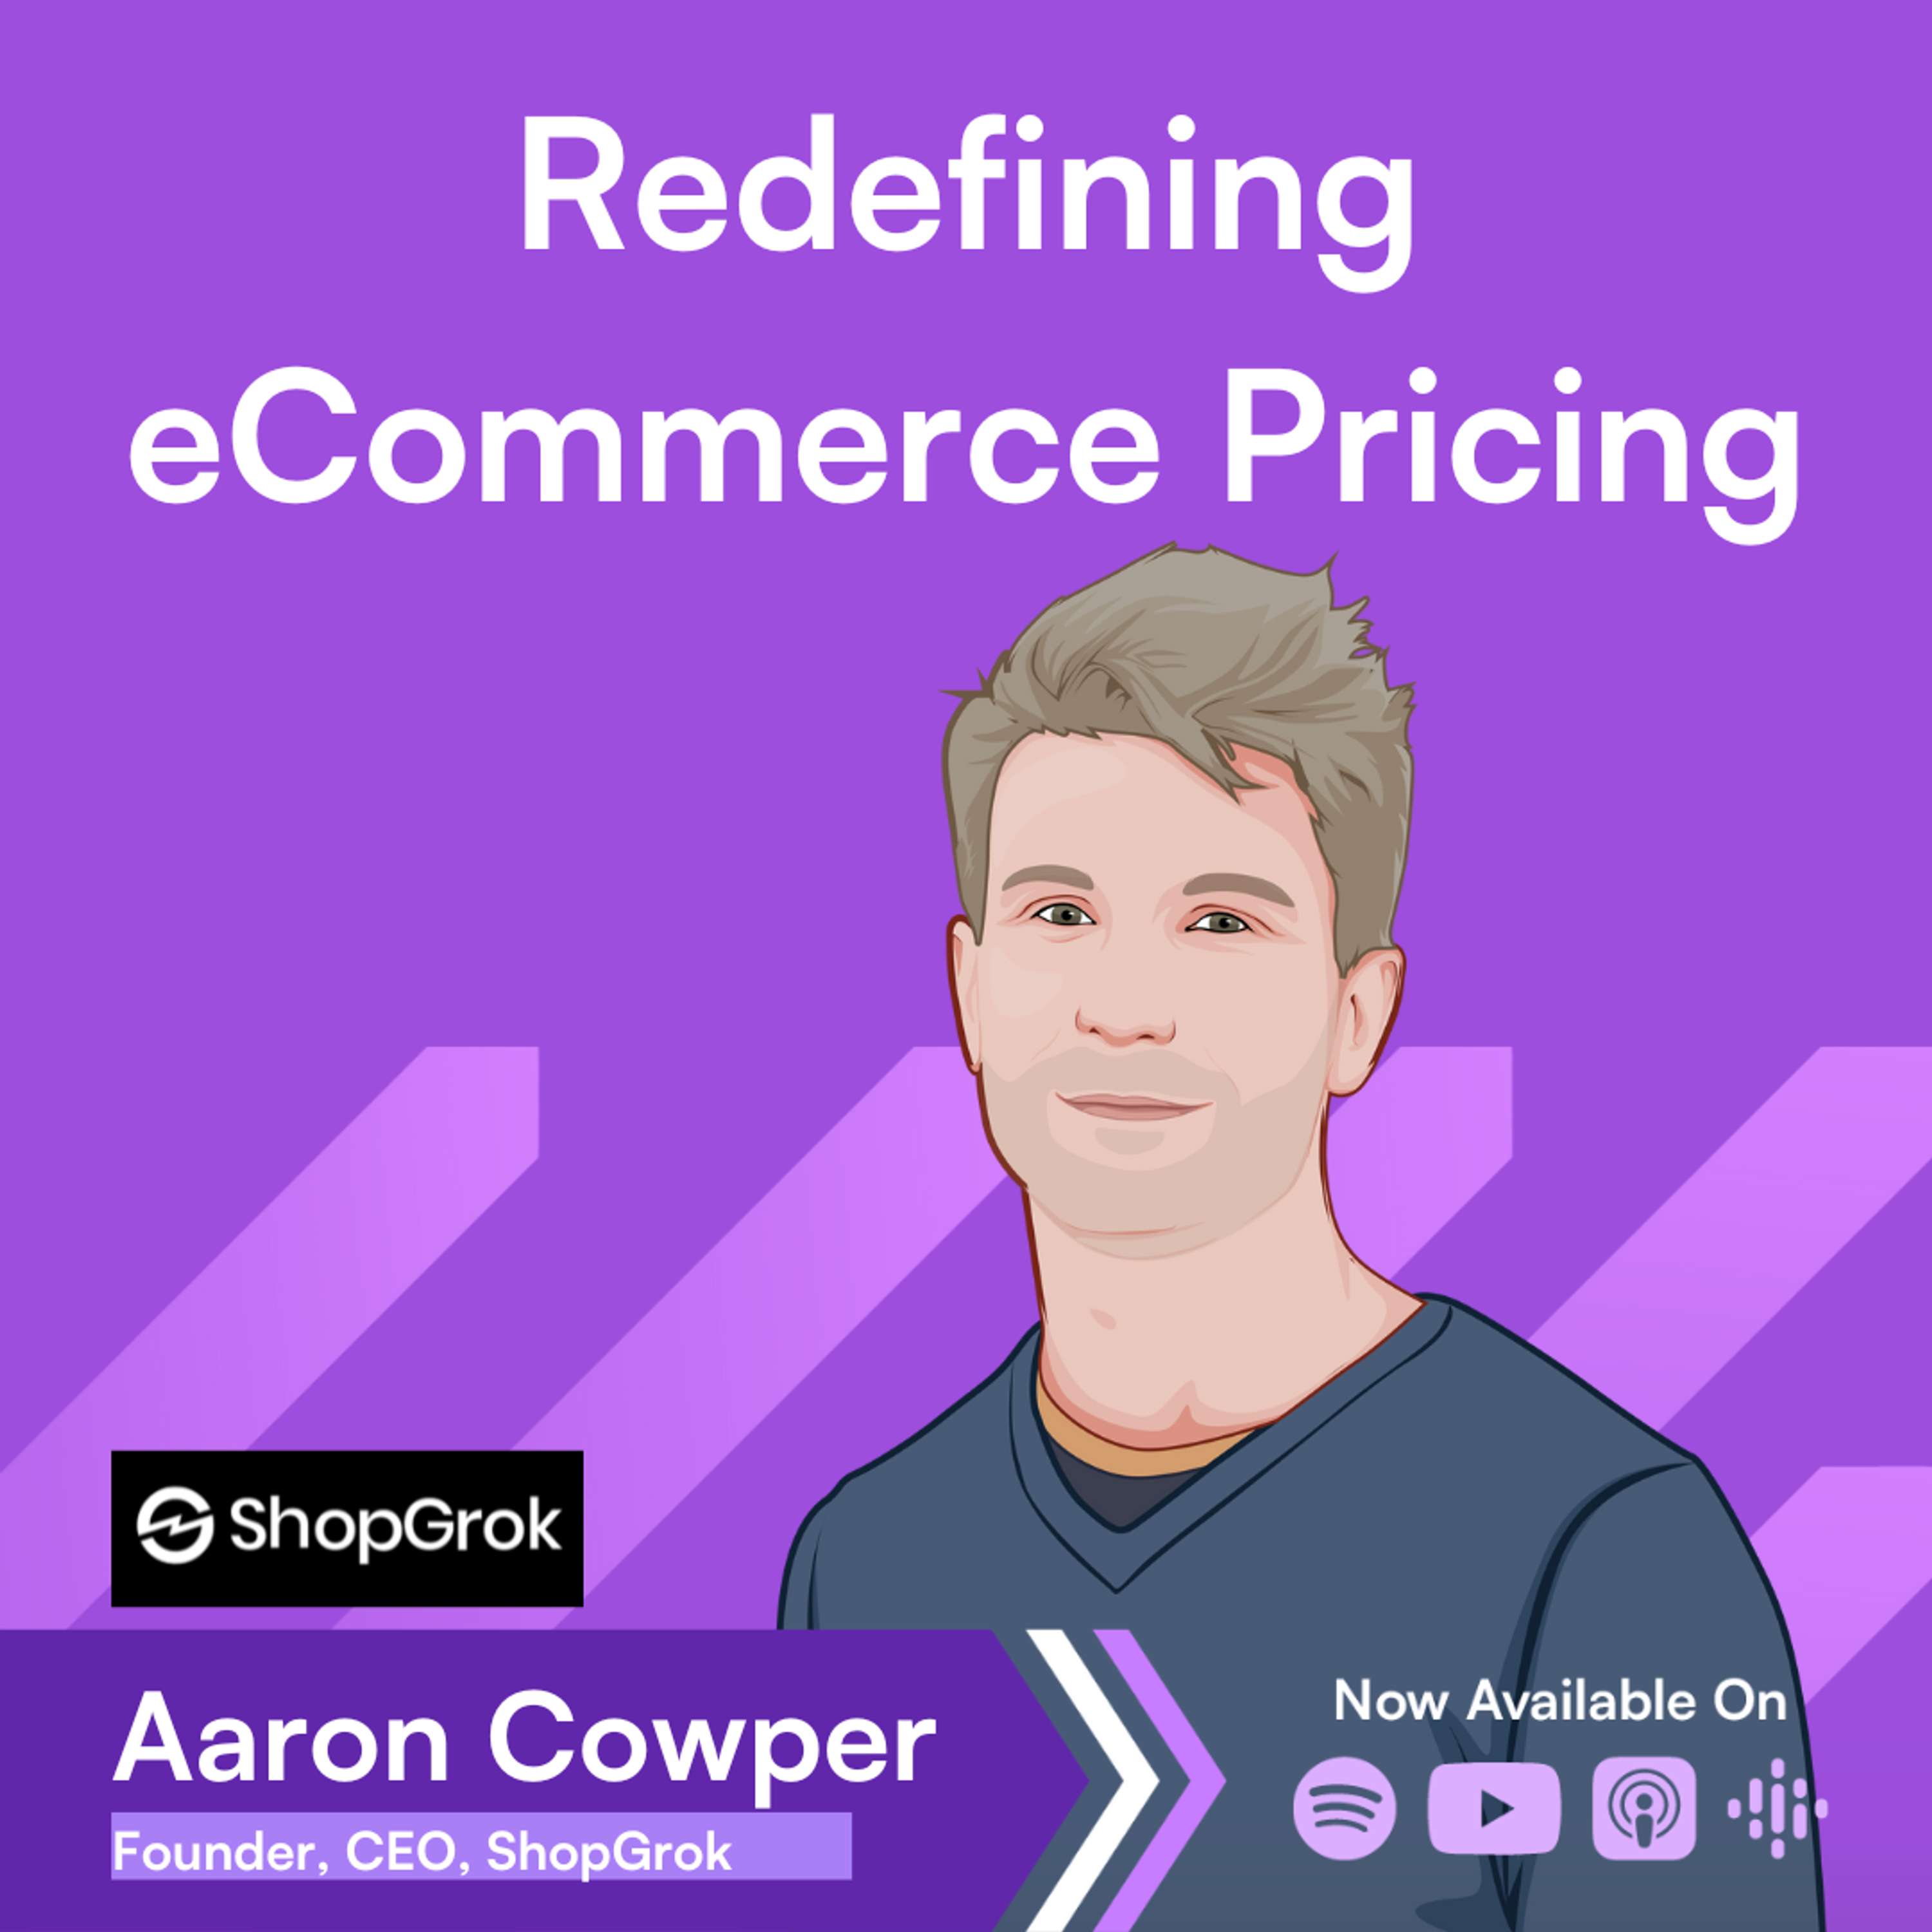 How to Make Better Pricing Decisions as an eCommerce Operator → Aaron Cowper